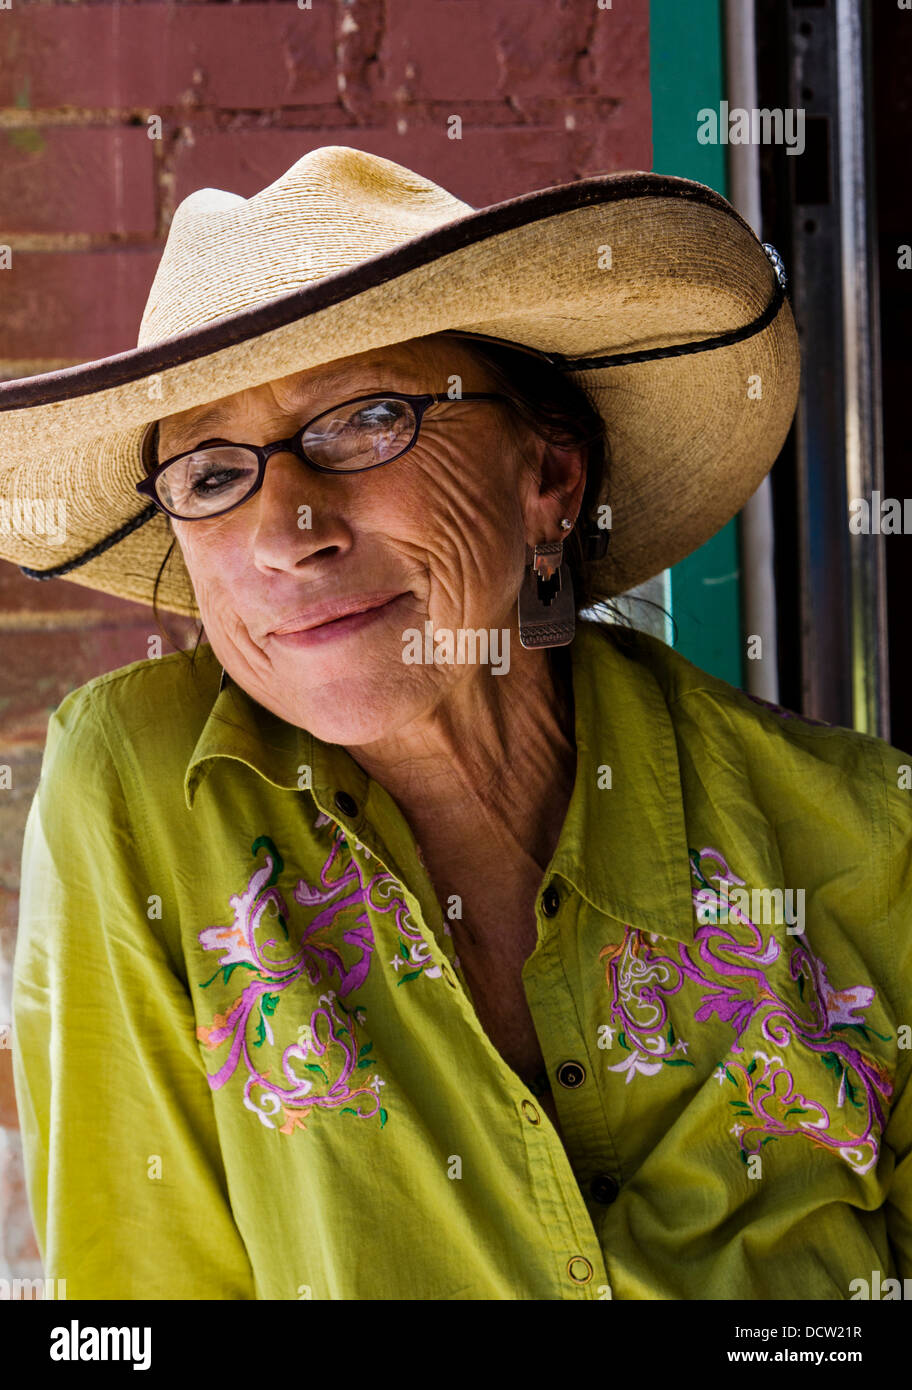 Older ranch woman with weathered face seated at a cafe enjoying warm sunny day, Buena Vista, Colorado, USA Stock Photo